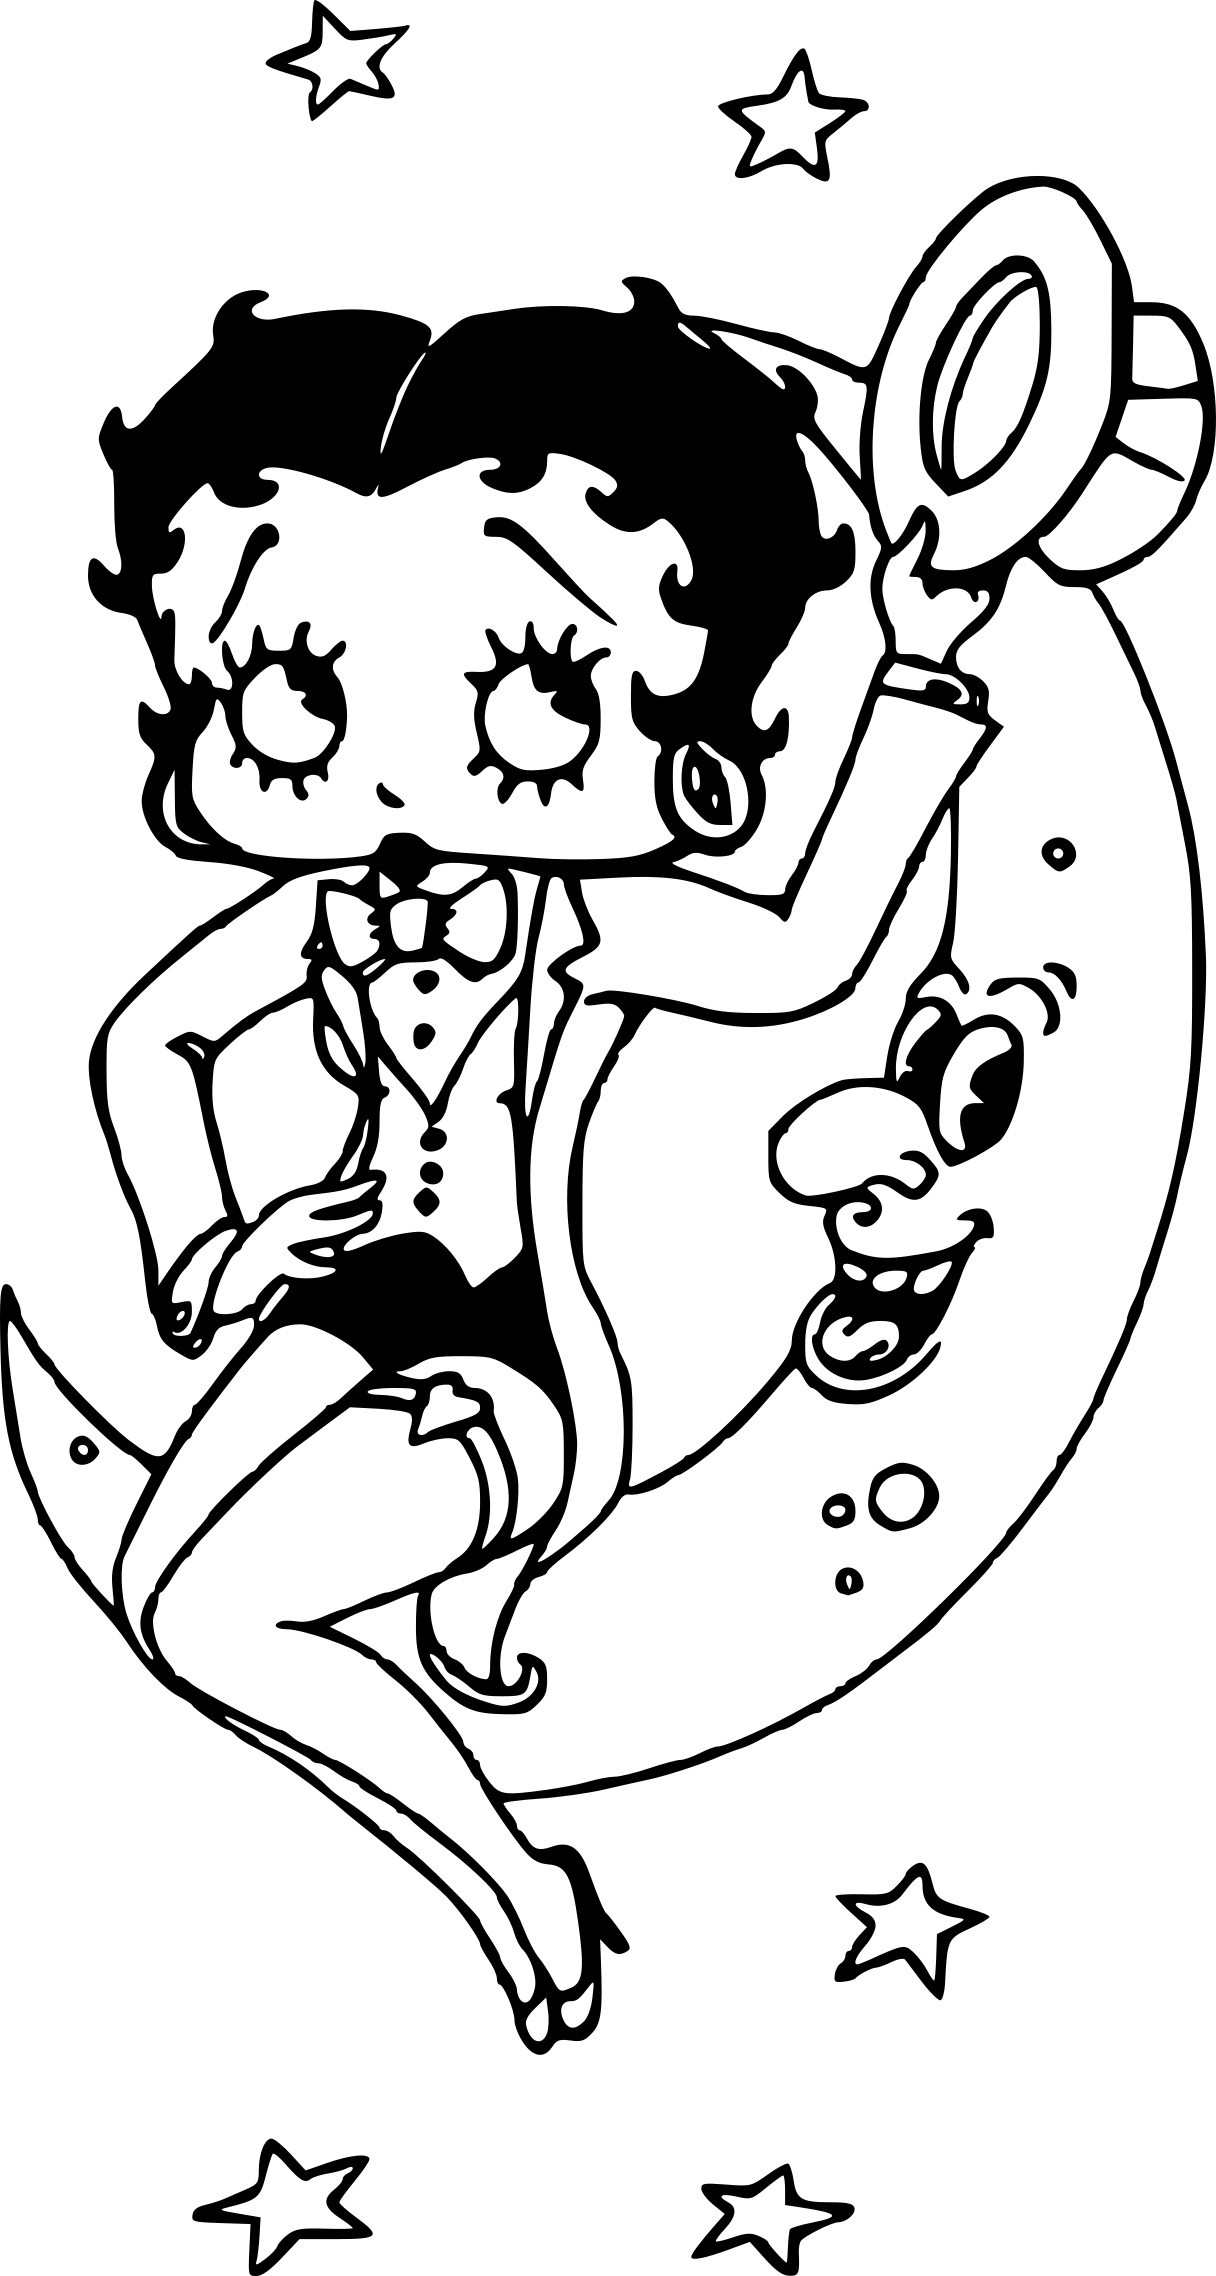 Betty Boop drawing and coloring page